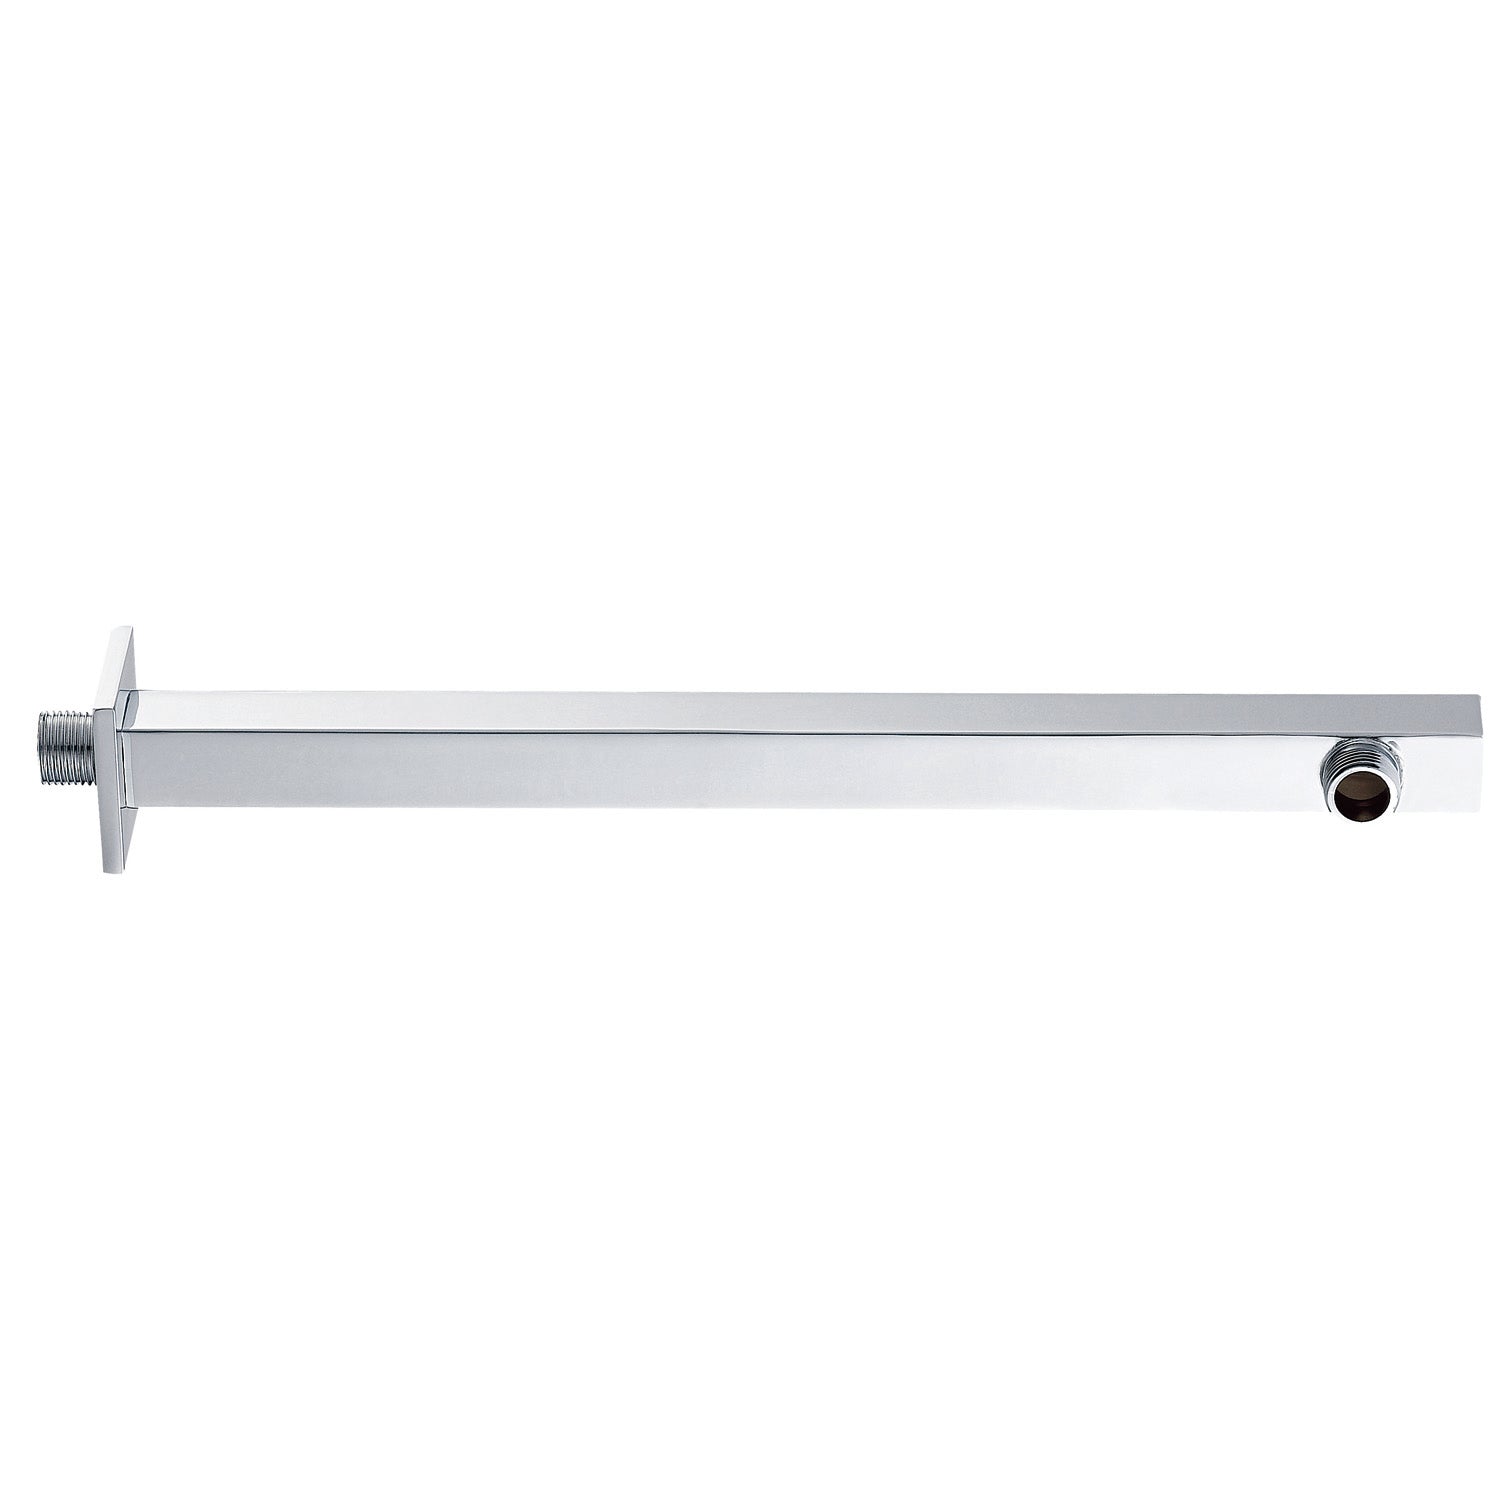 Dax Brass Square Shower Arm 12 Inches Chrome Finish (DAX-1011-325-CR)